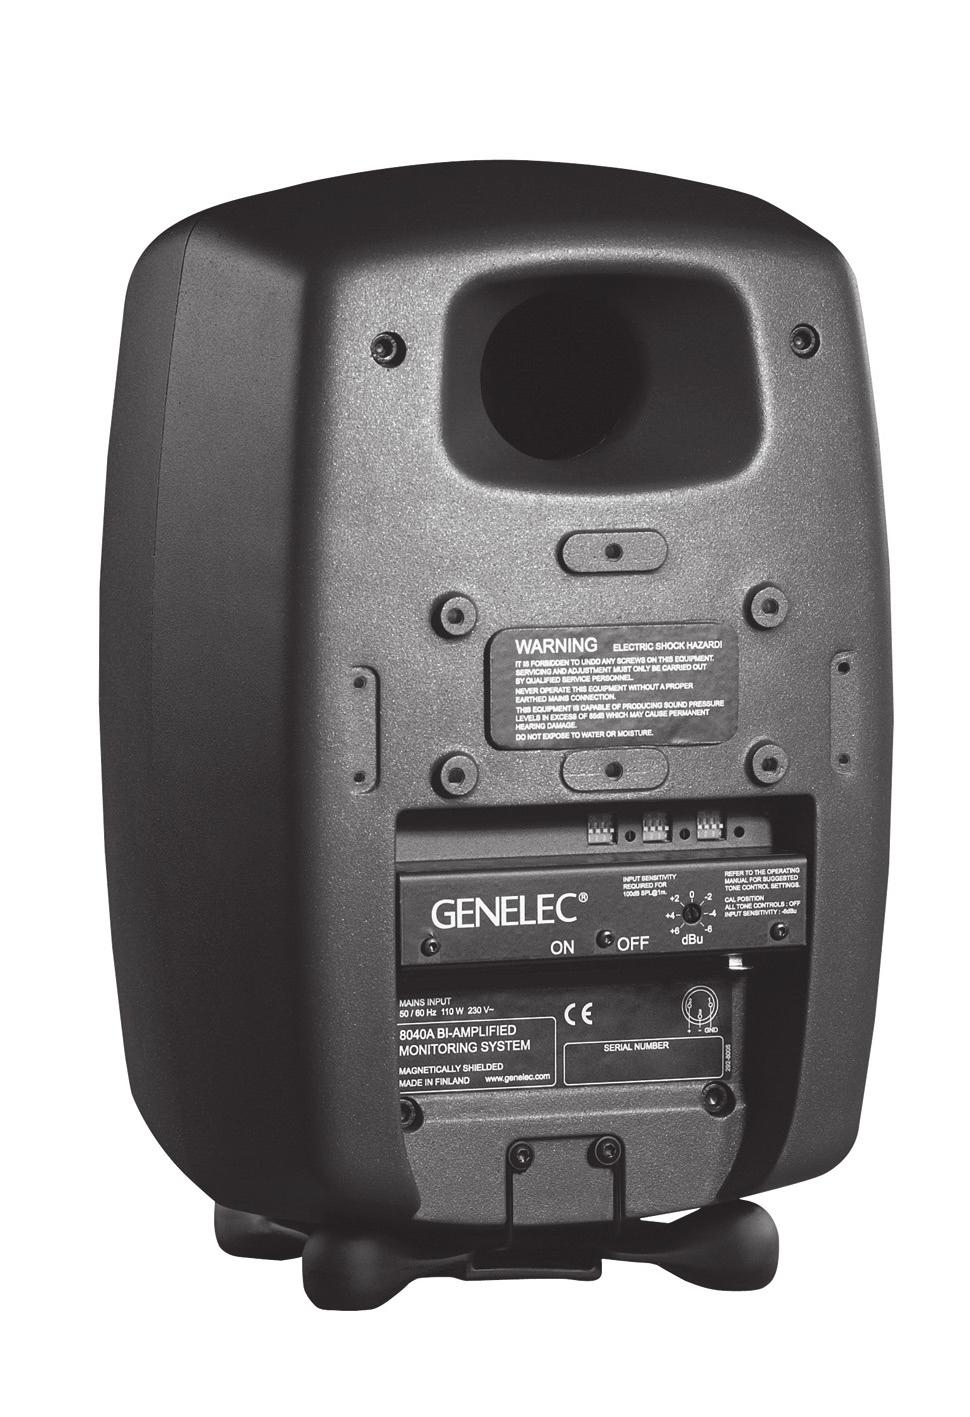 Genelec 8040A and 8050A Monitoring Systems System The GENELEC 8040A and 8050A are two way active monitoring loudspeakers designed to produce high SPL output, low coloration and broad bandwidth in a